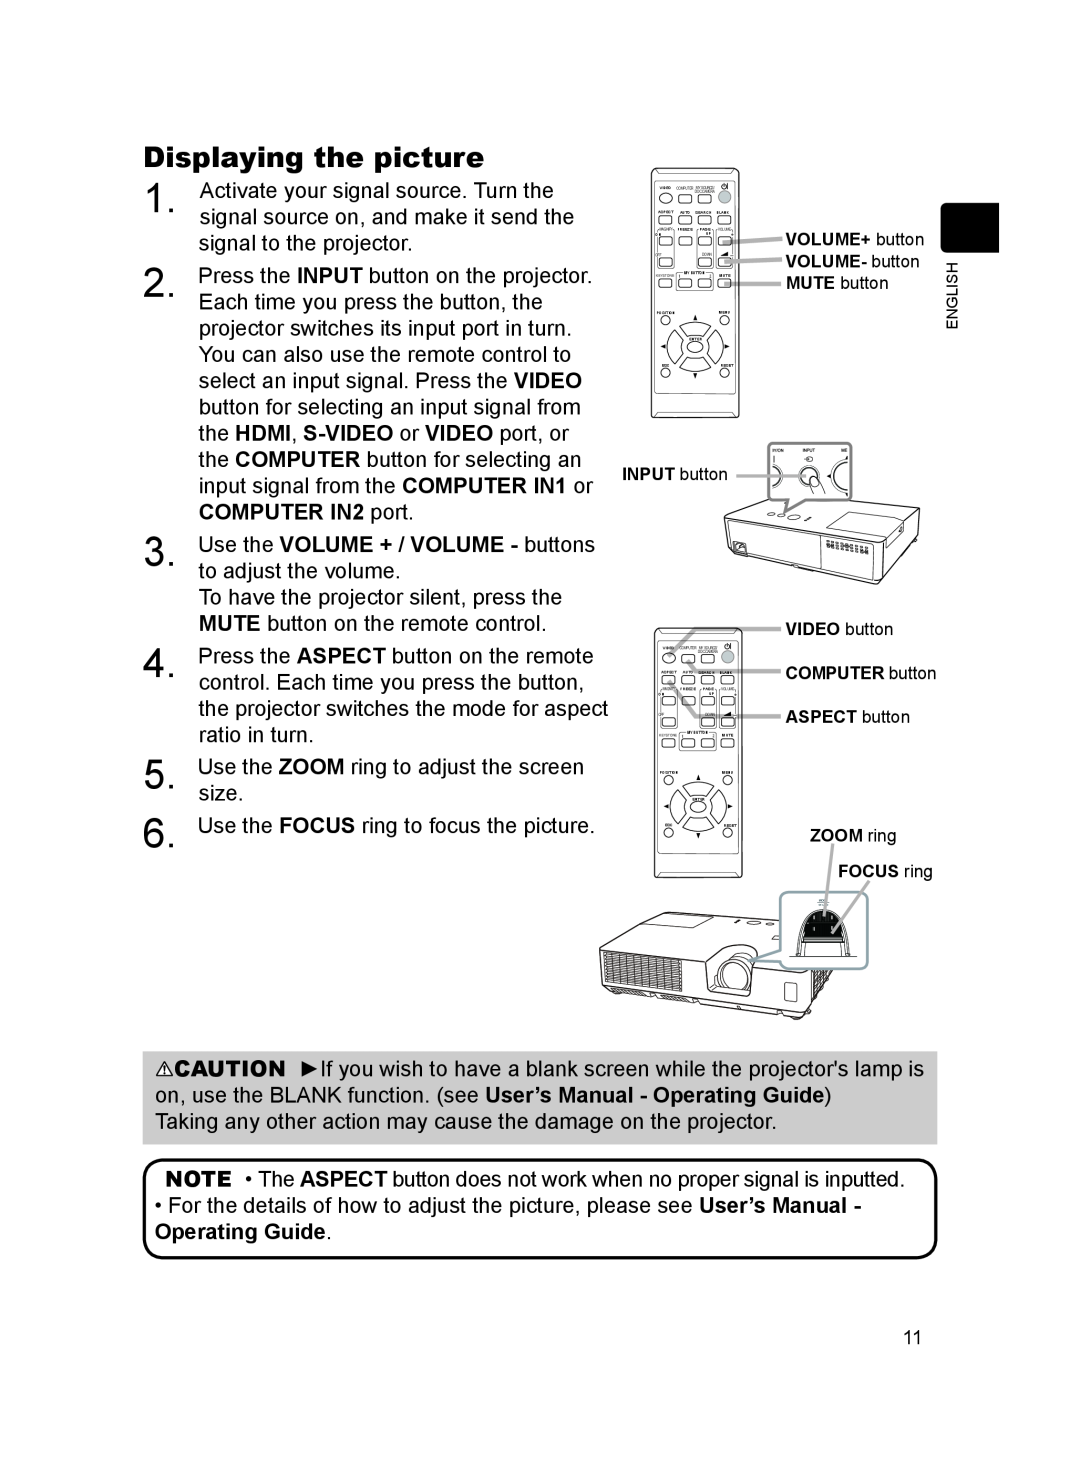 Dukane 8793h user manual Displaying the picture 